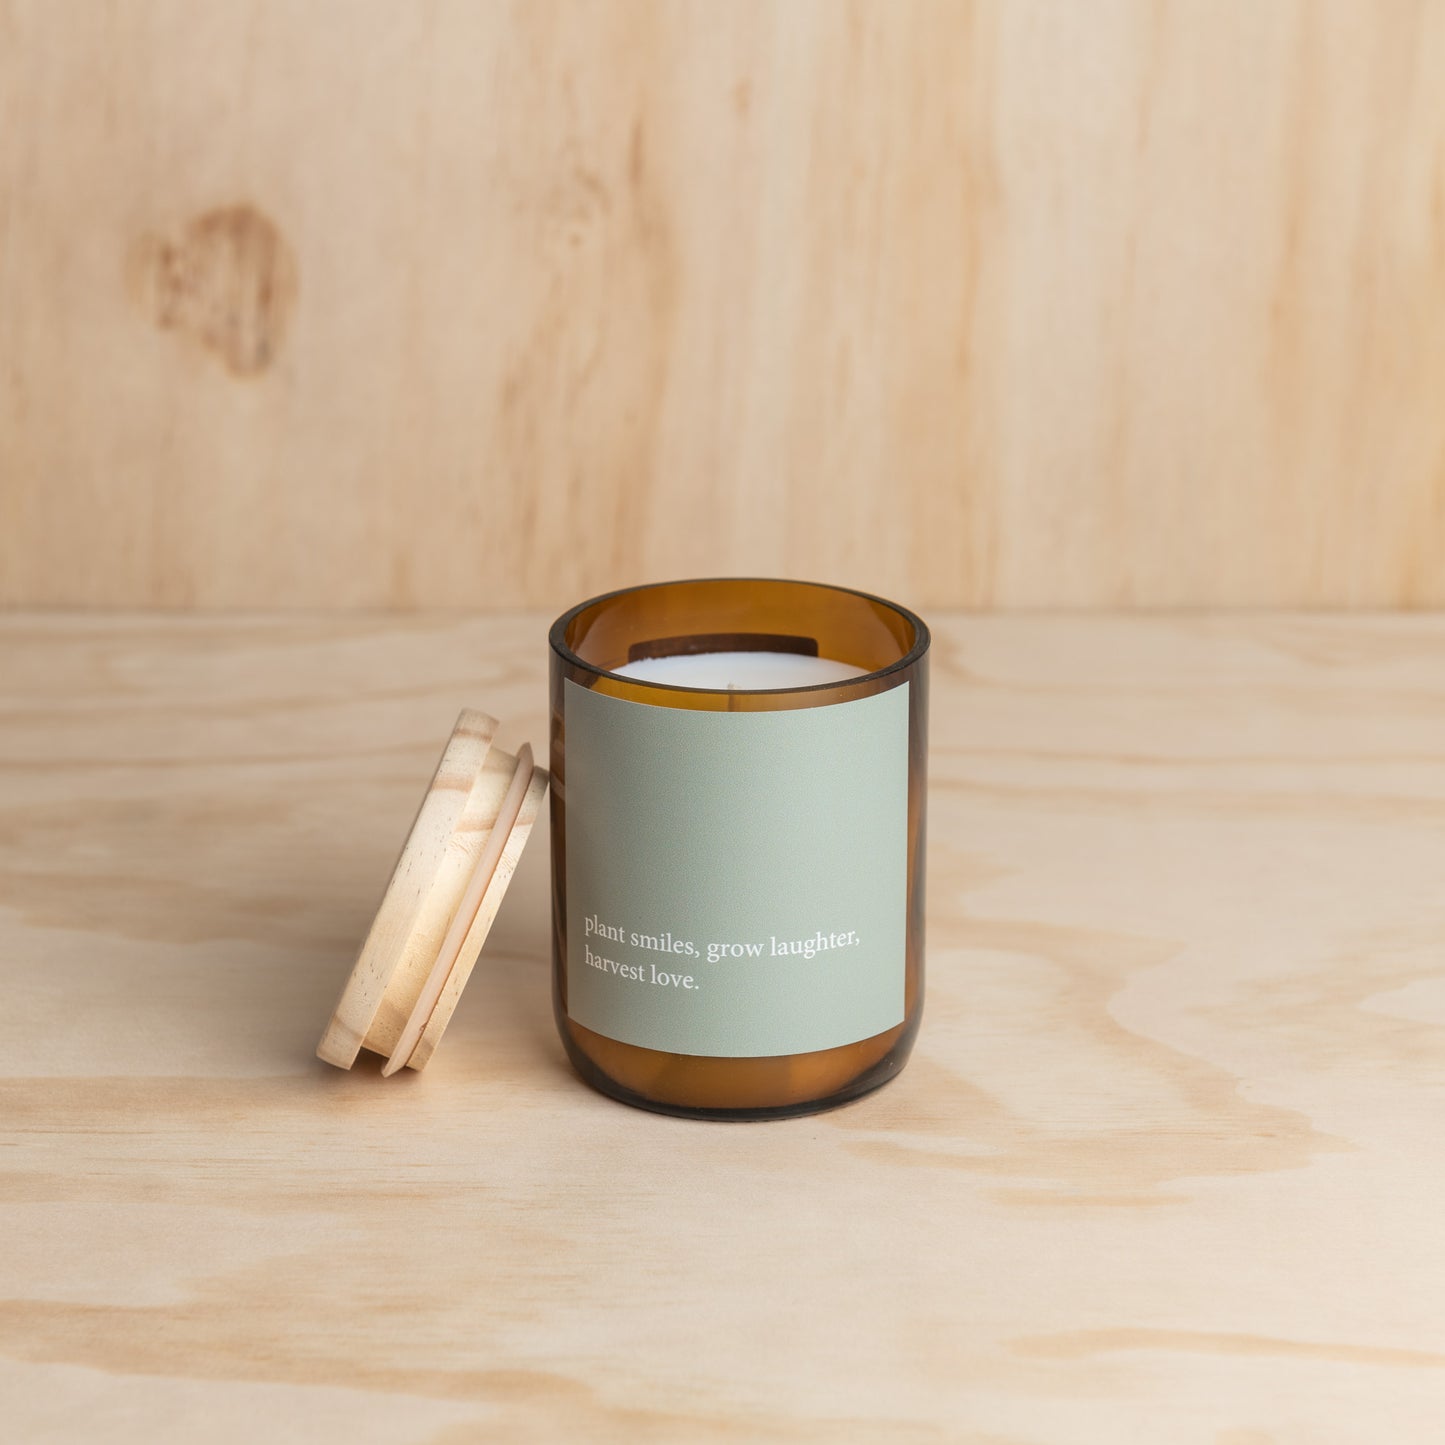 Heartfelt Quote Candle - smiles, laughter, love